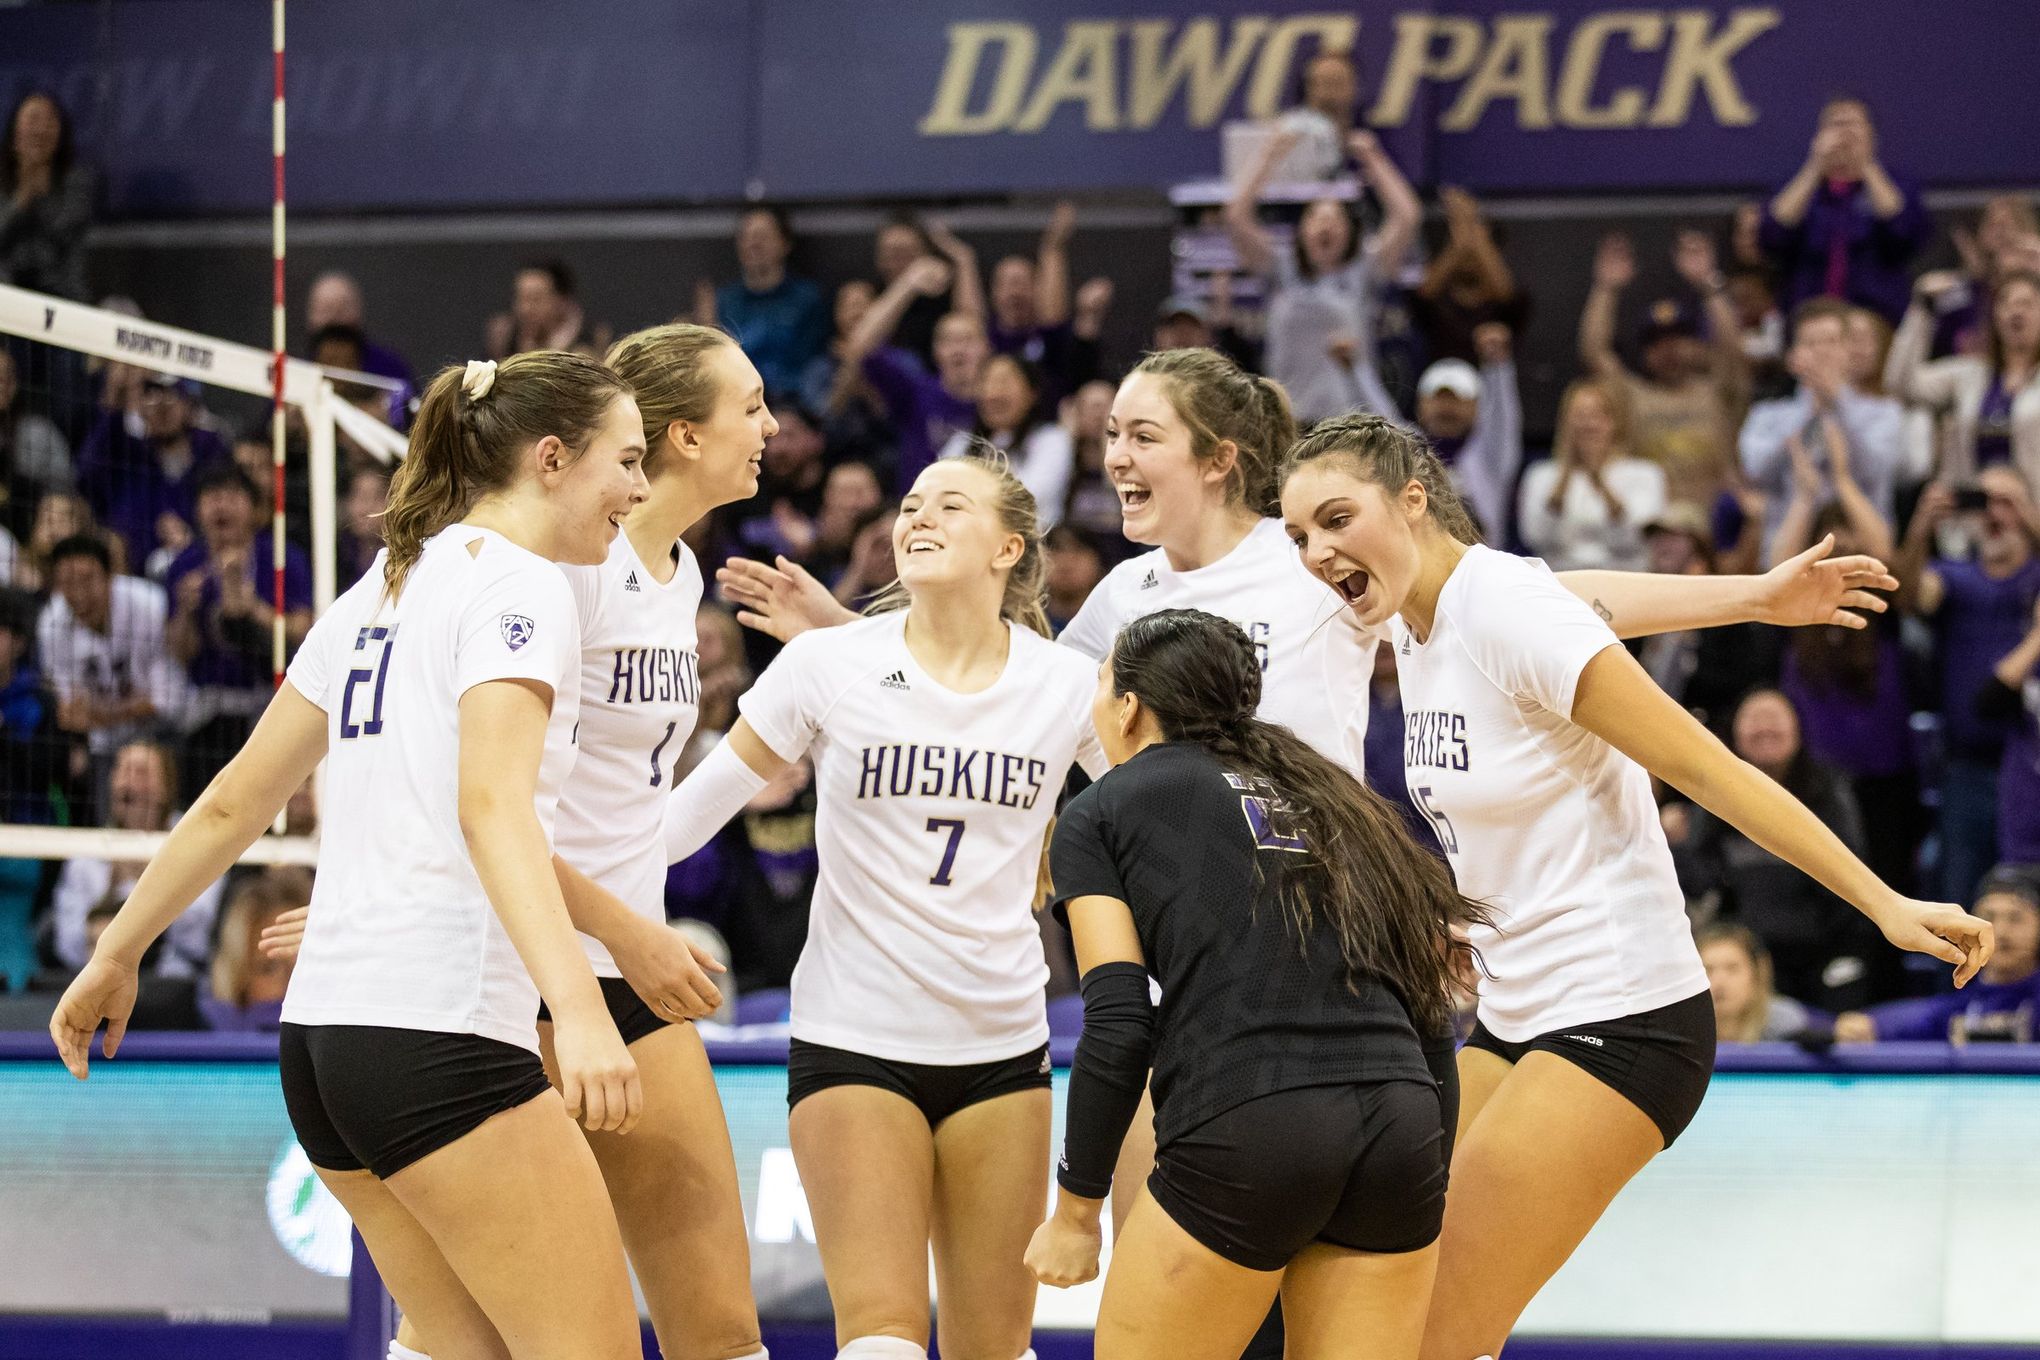 UW Huskies volleyball squad has nationalchampionship capability and